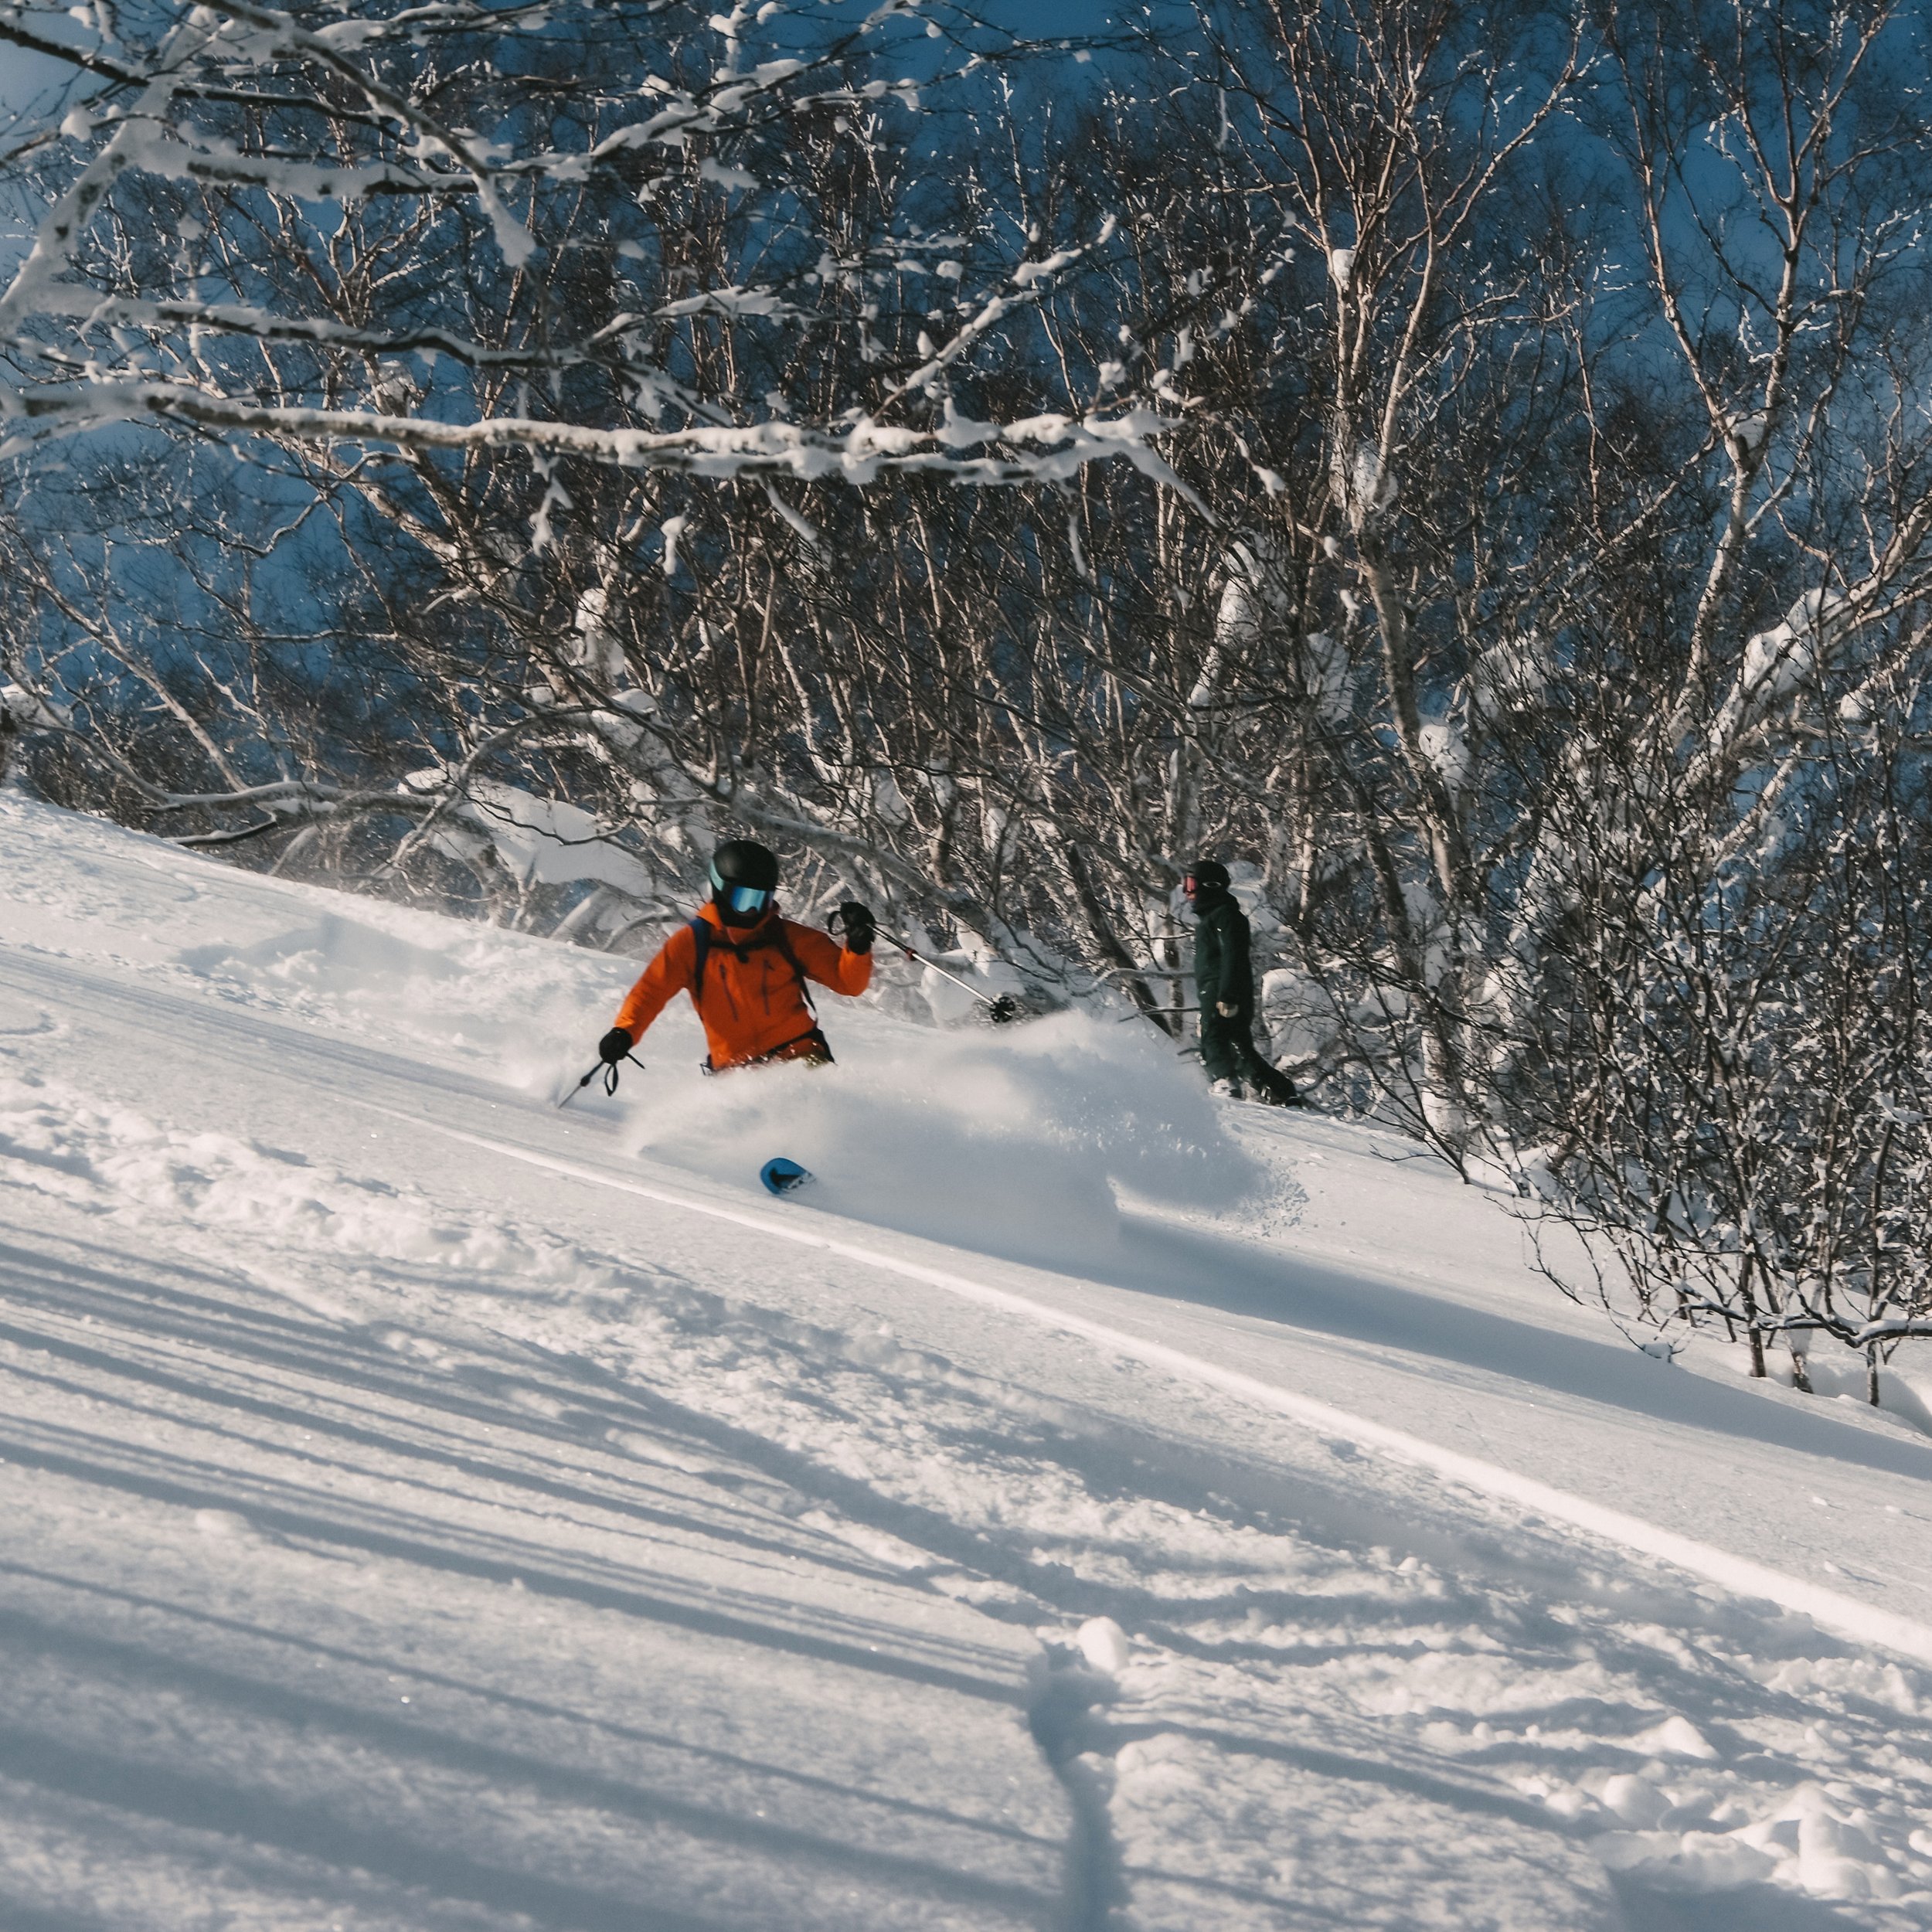 Powder like this is no longer a dream! 🌨️✨ Our unforgettable ski adventures in Japan brought those dreams to life. Want to experience it for yourself? Visit the link in our bio for more information. Let&rsquo;s make your powder dreams a reality!
.
.